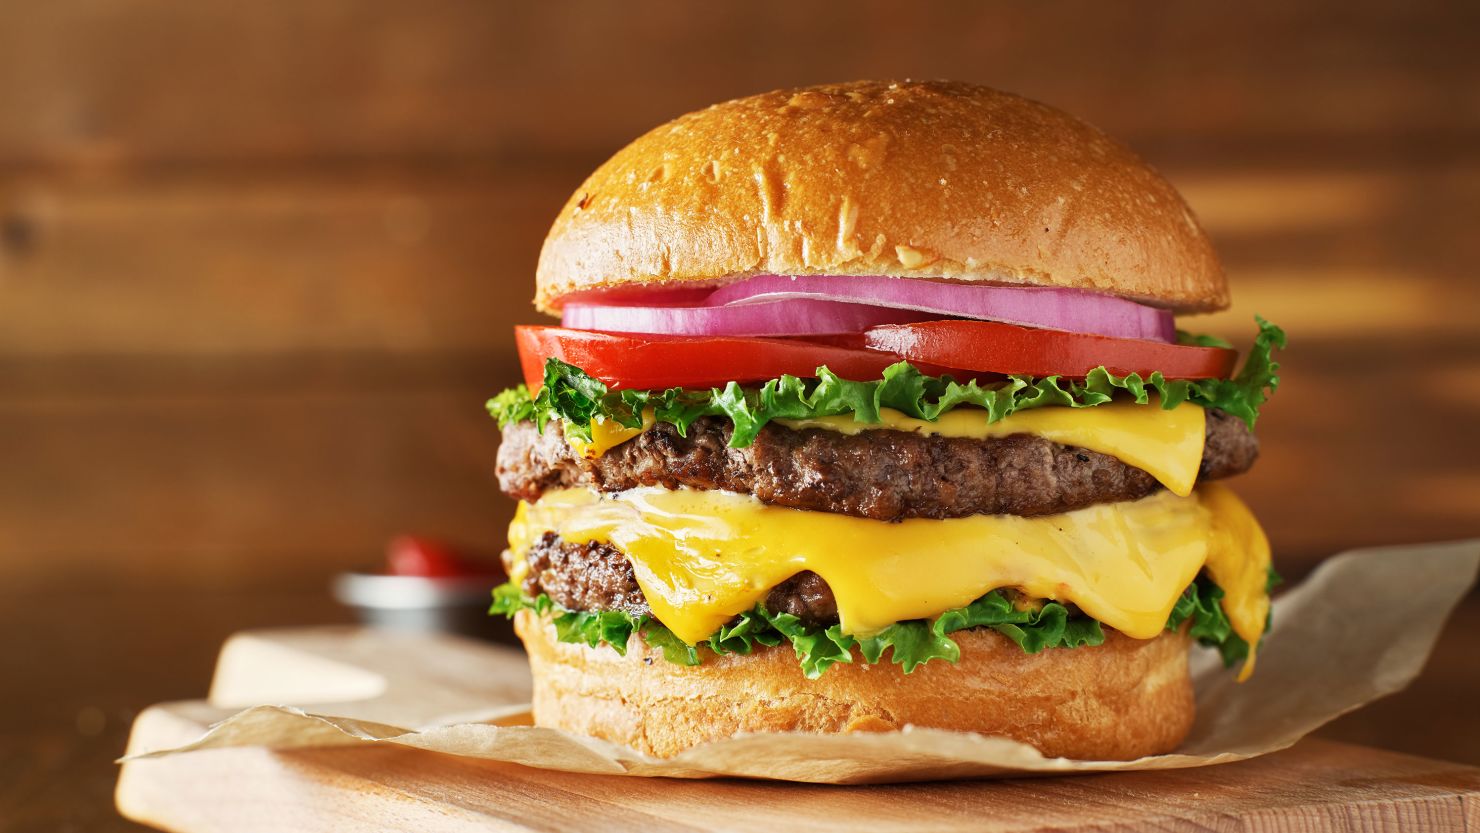 Check out these National Cheeseburger Day deals